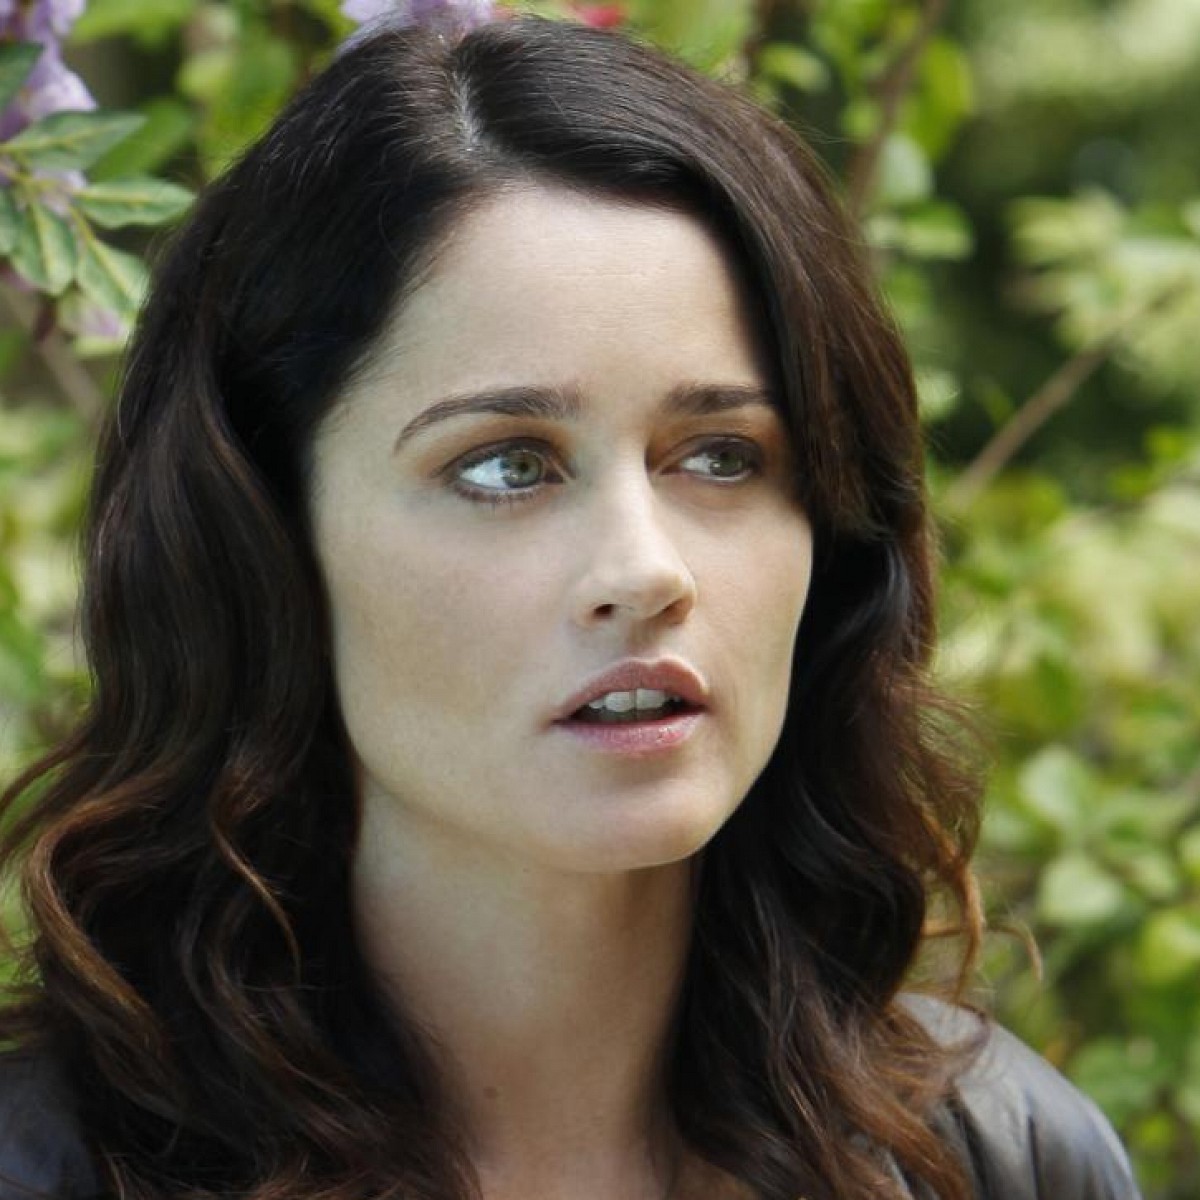 Robin tunney images